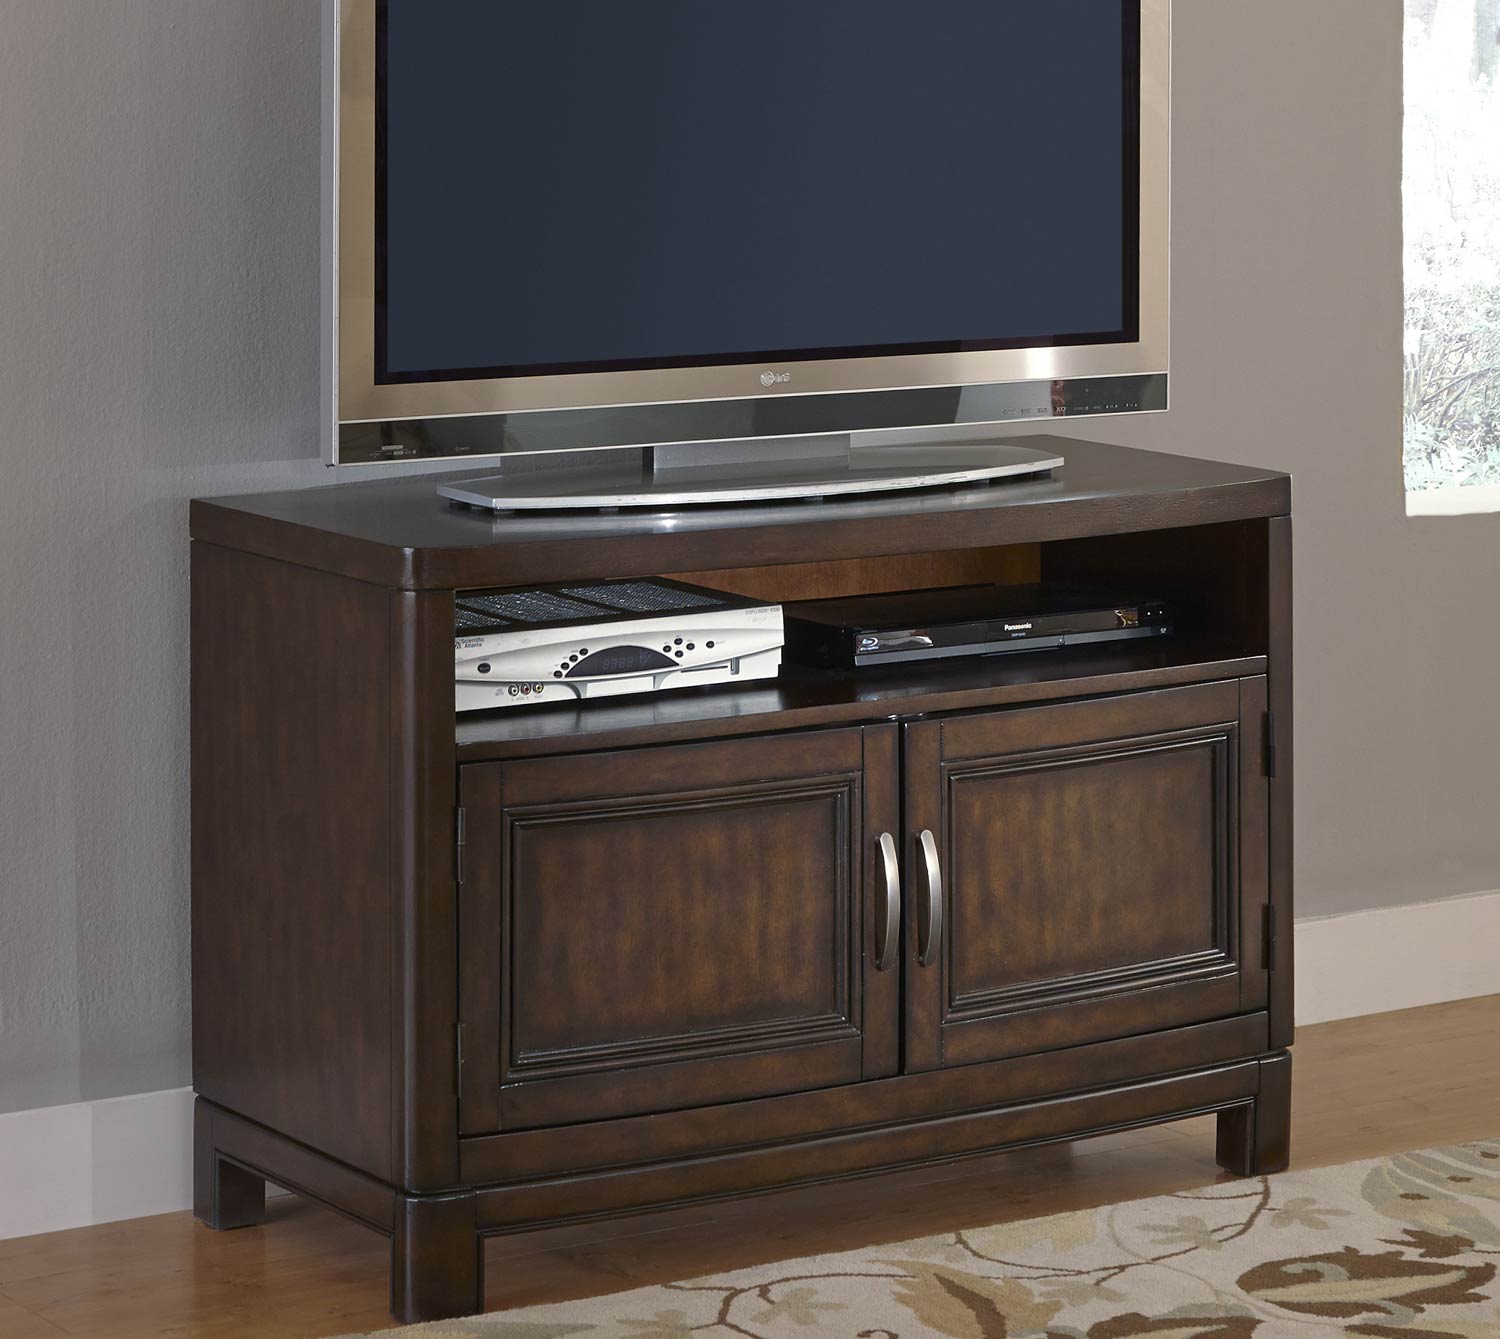 Home Styles Crescent Hill 44 Inch TV Stand - Two-tone tortoise shell